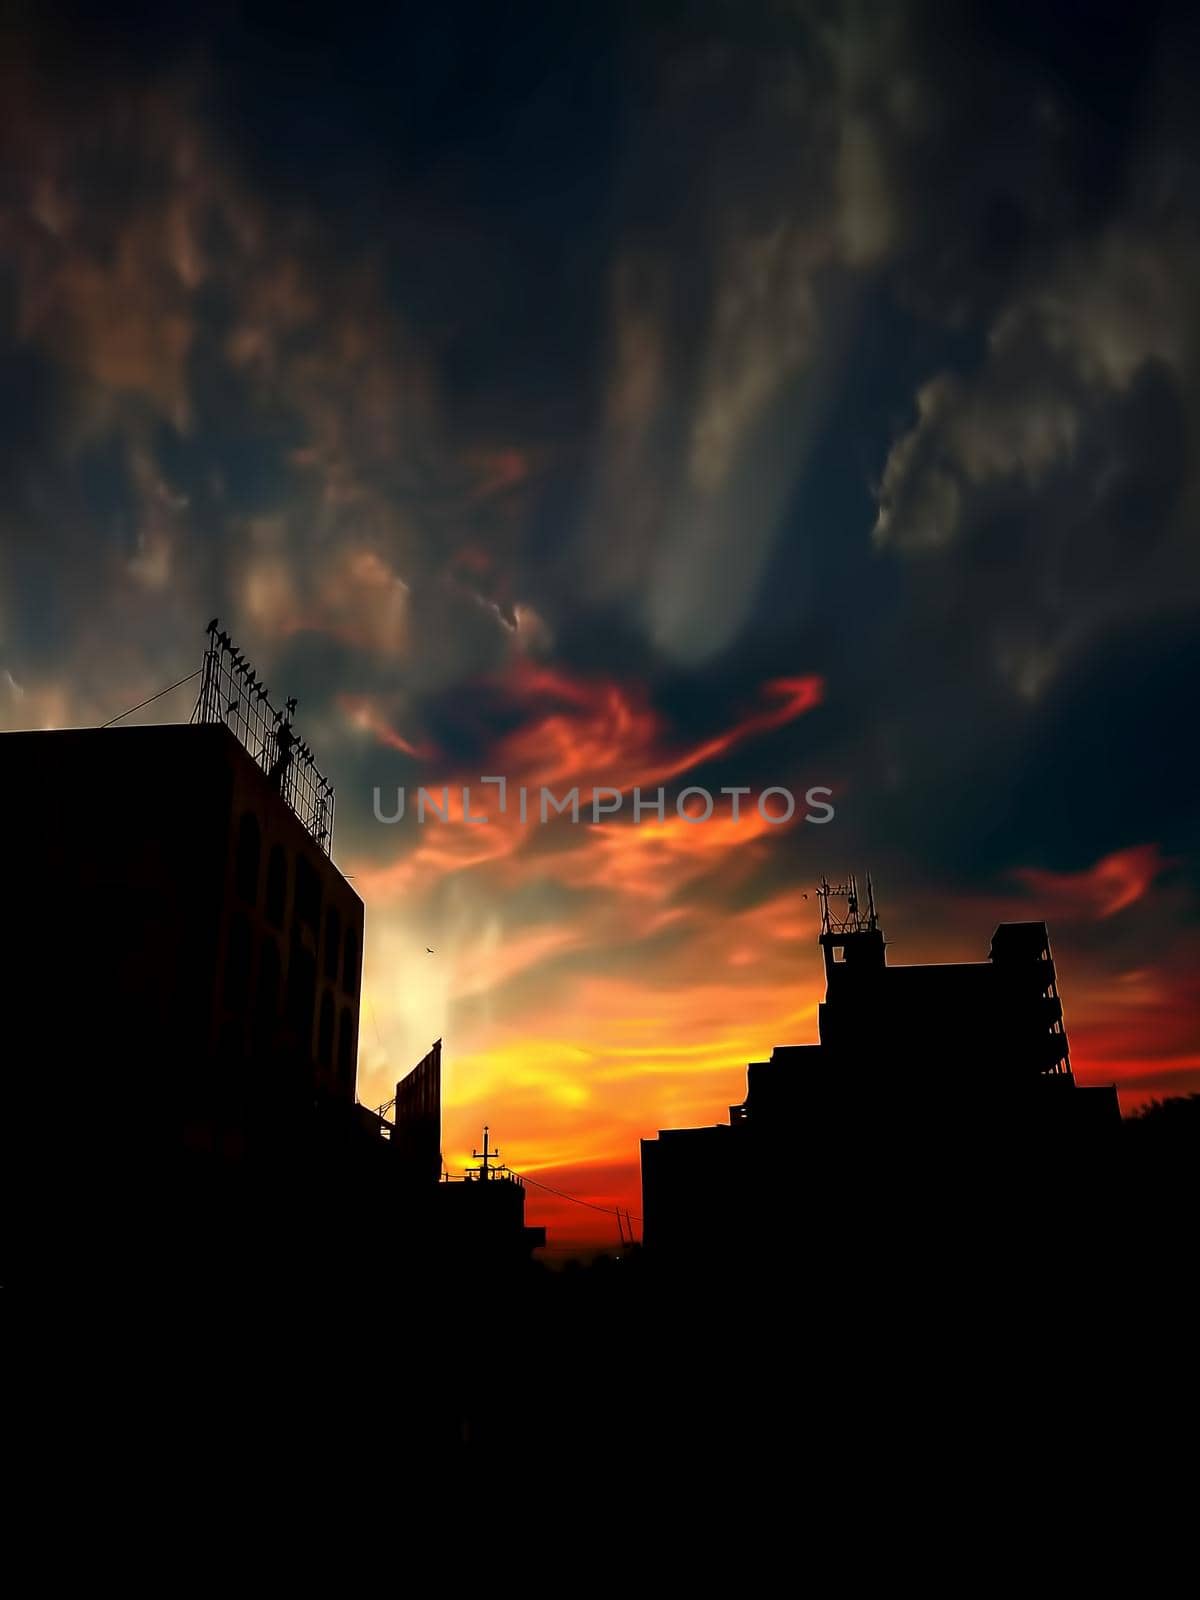 Sunset Dusk time shot of clouds and sun setting in background along with some silhouette of buildings also. by mirzamlk